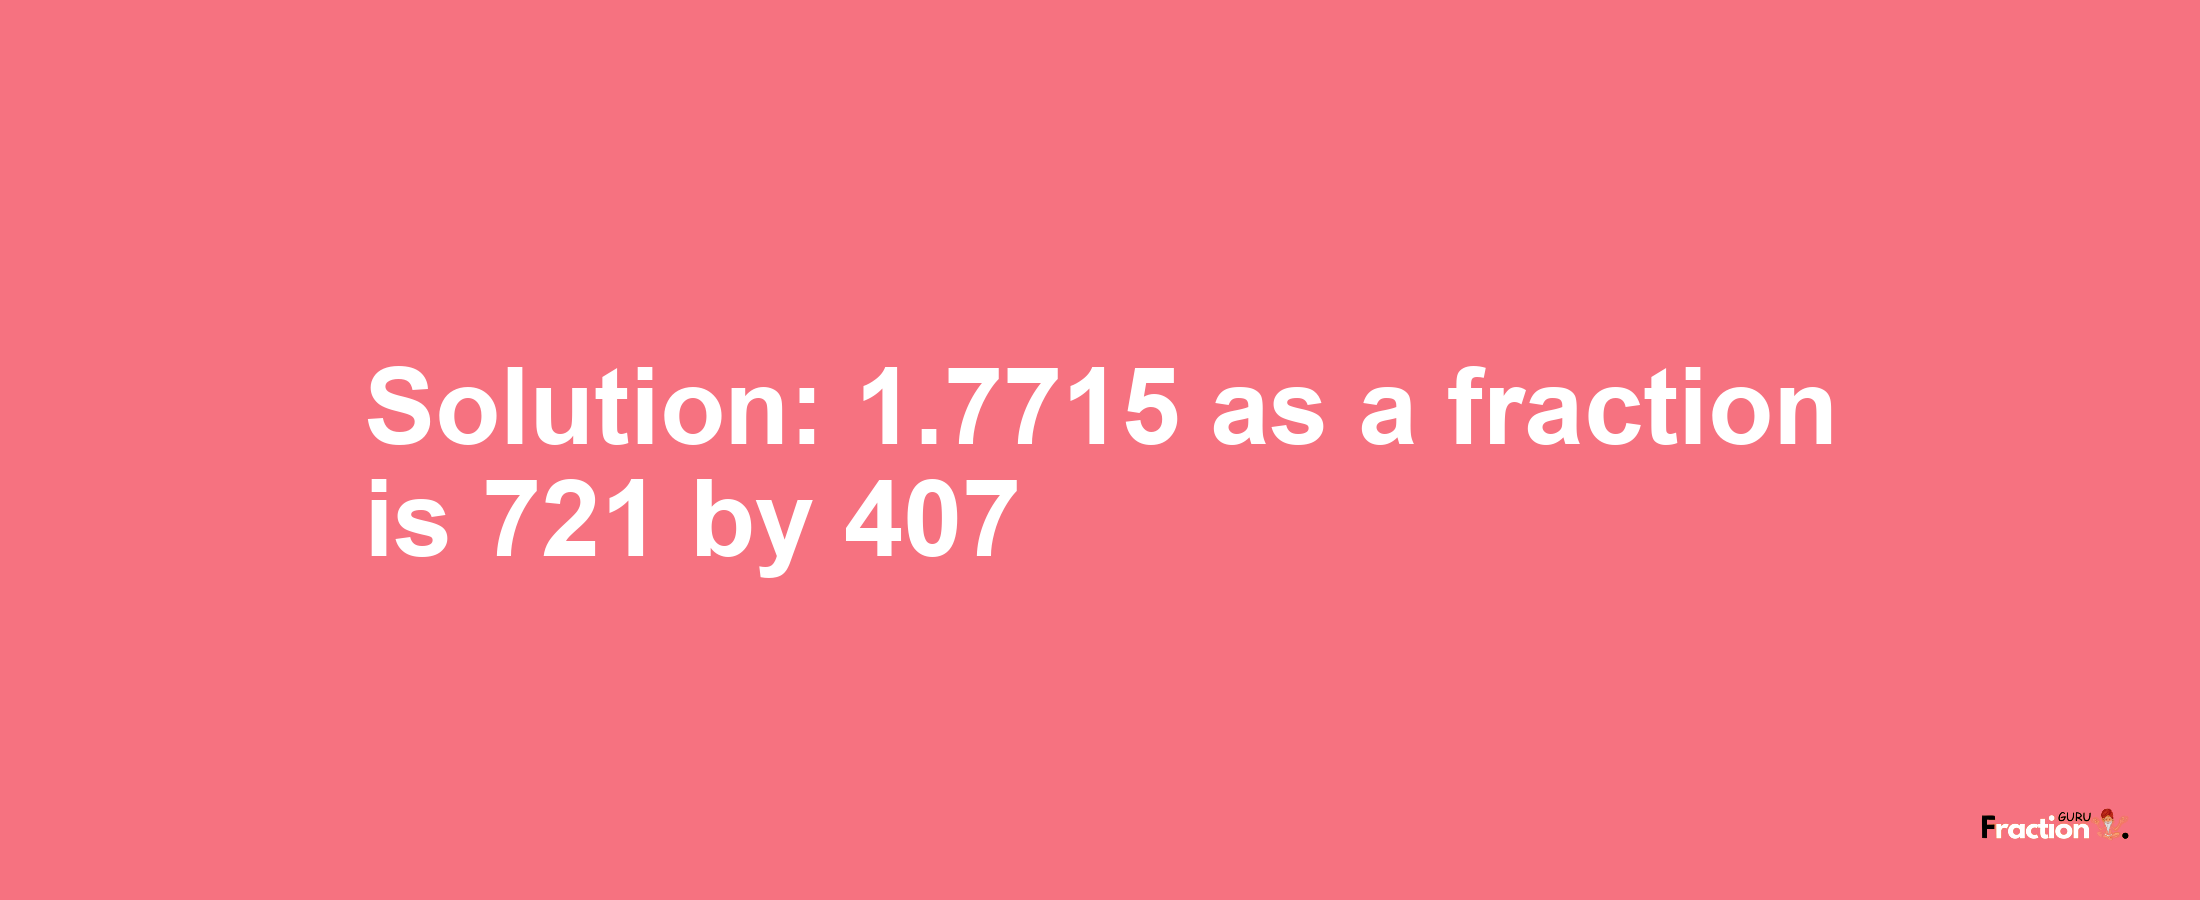 Solution:1.7715 as a fraction is 721/407